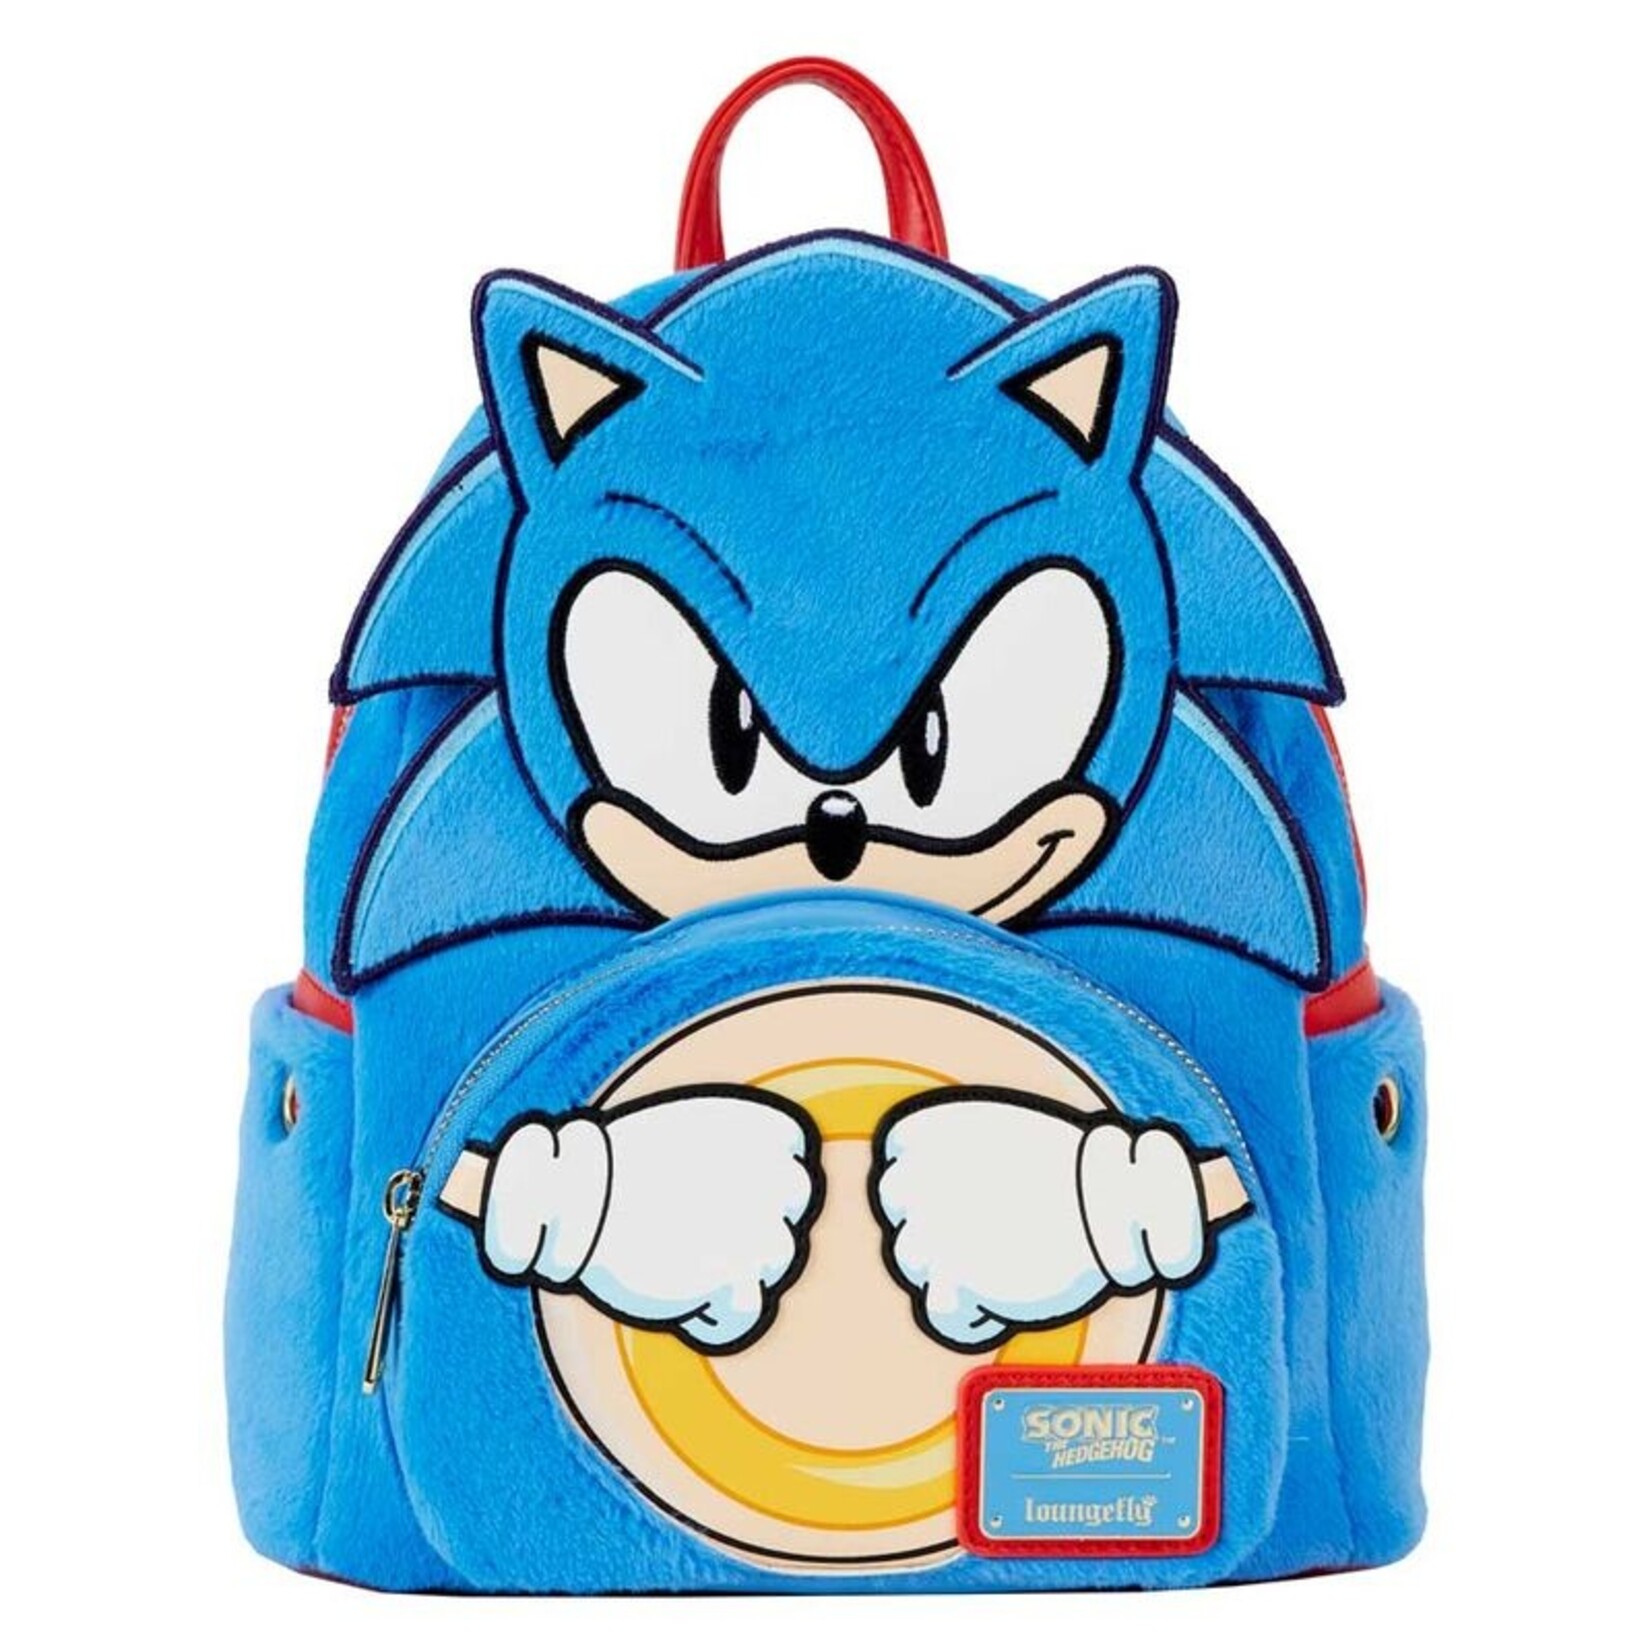 Loungefly Loungefly Sonic The Hedgehog Backpack Classic Cosplay 27 cm